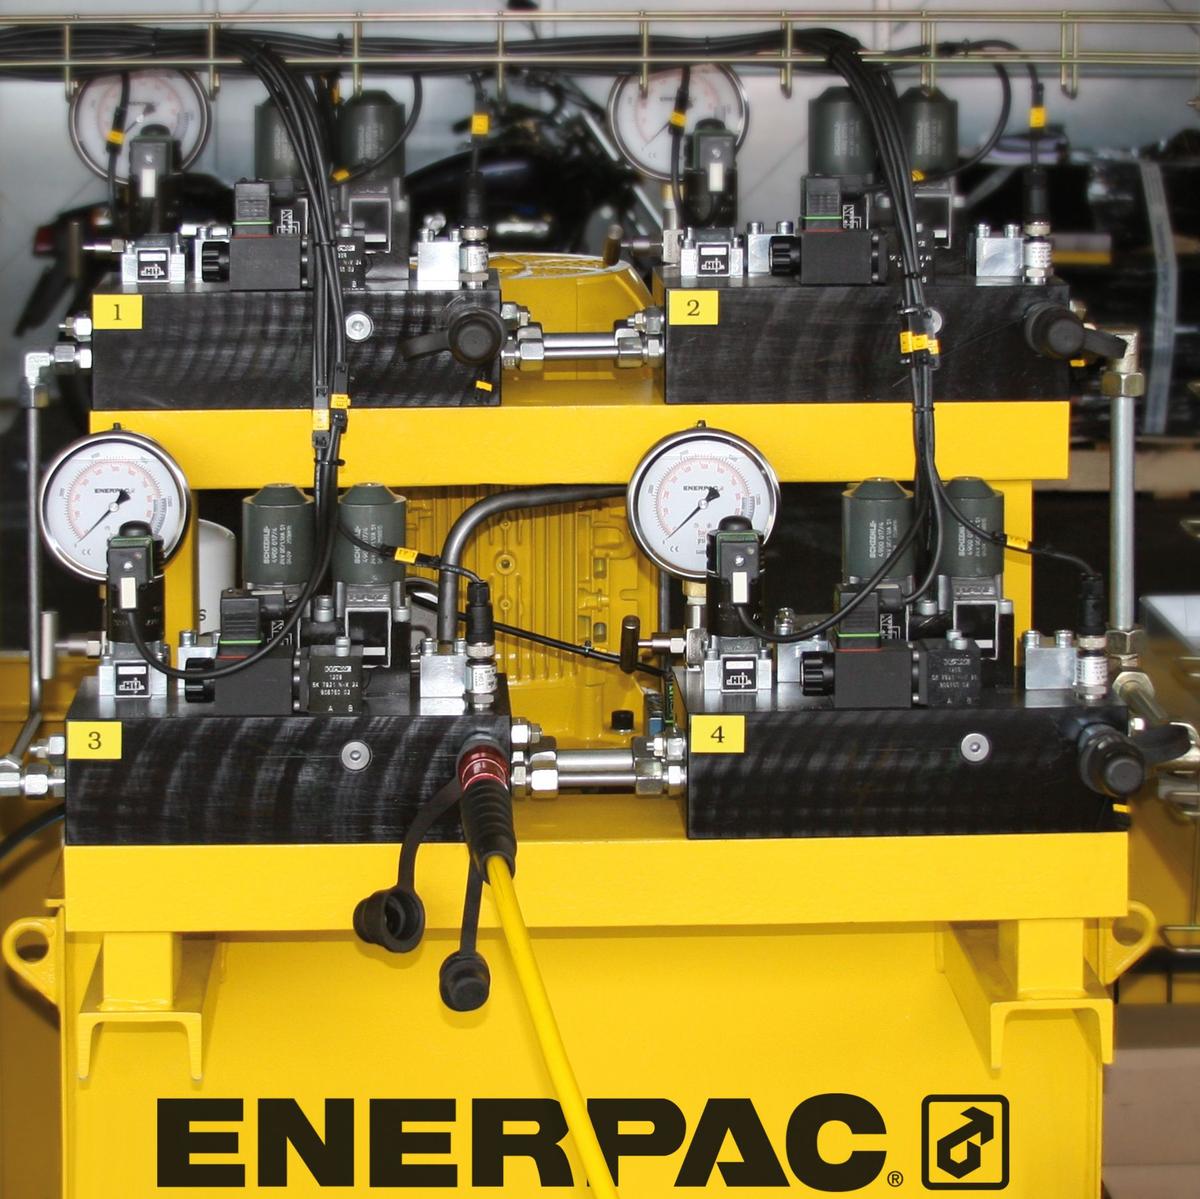 The hydraulic power pack for the Synchronous Lifting System 